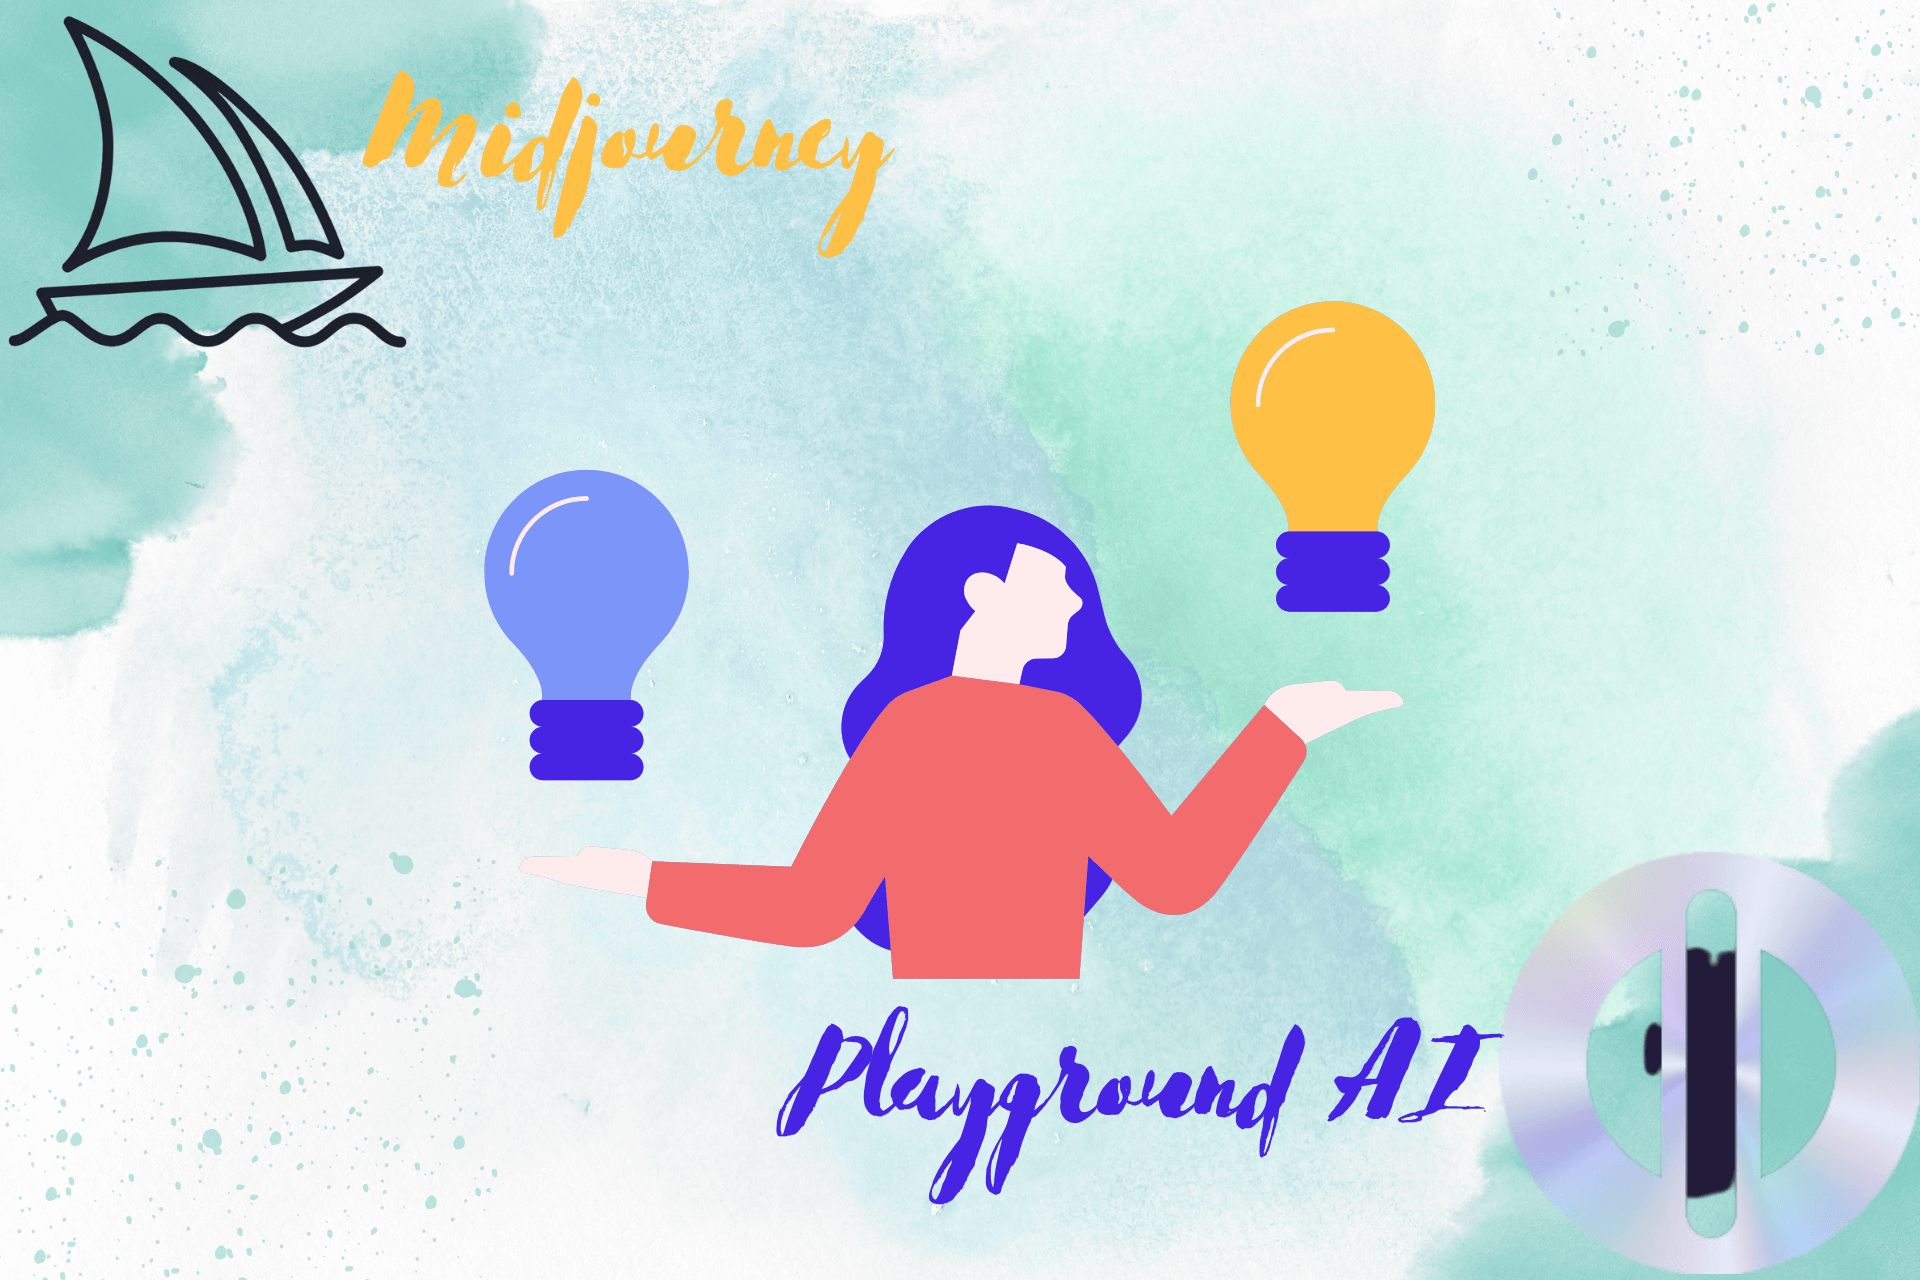 Midjourney vs. Playground AI - Which One is Better For You?